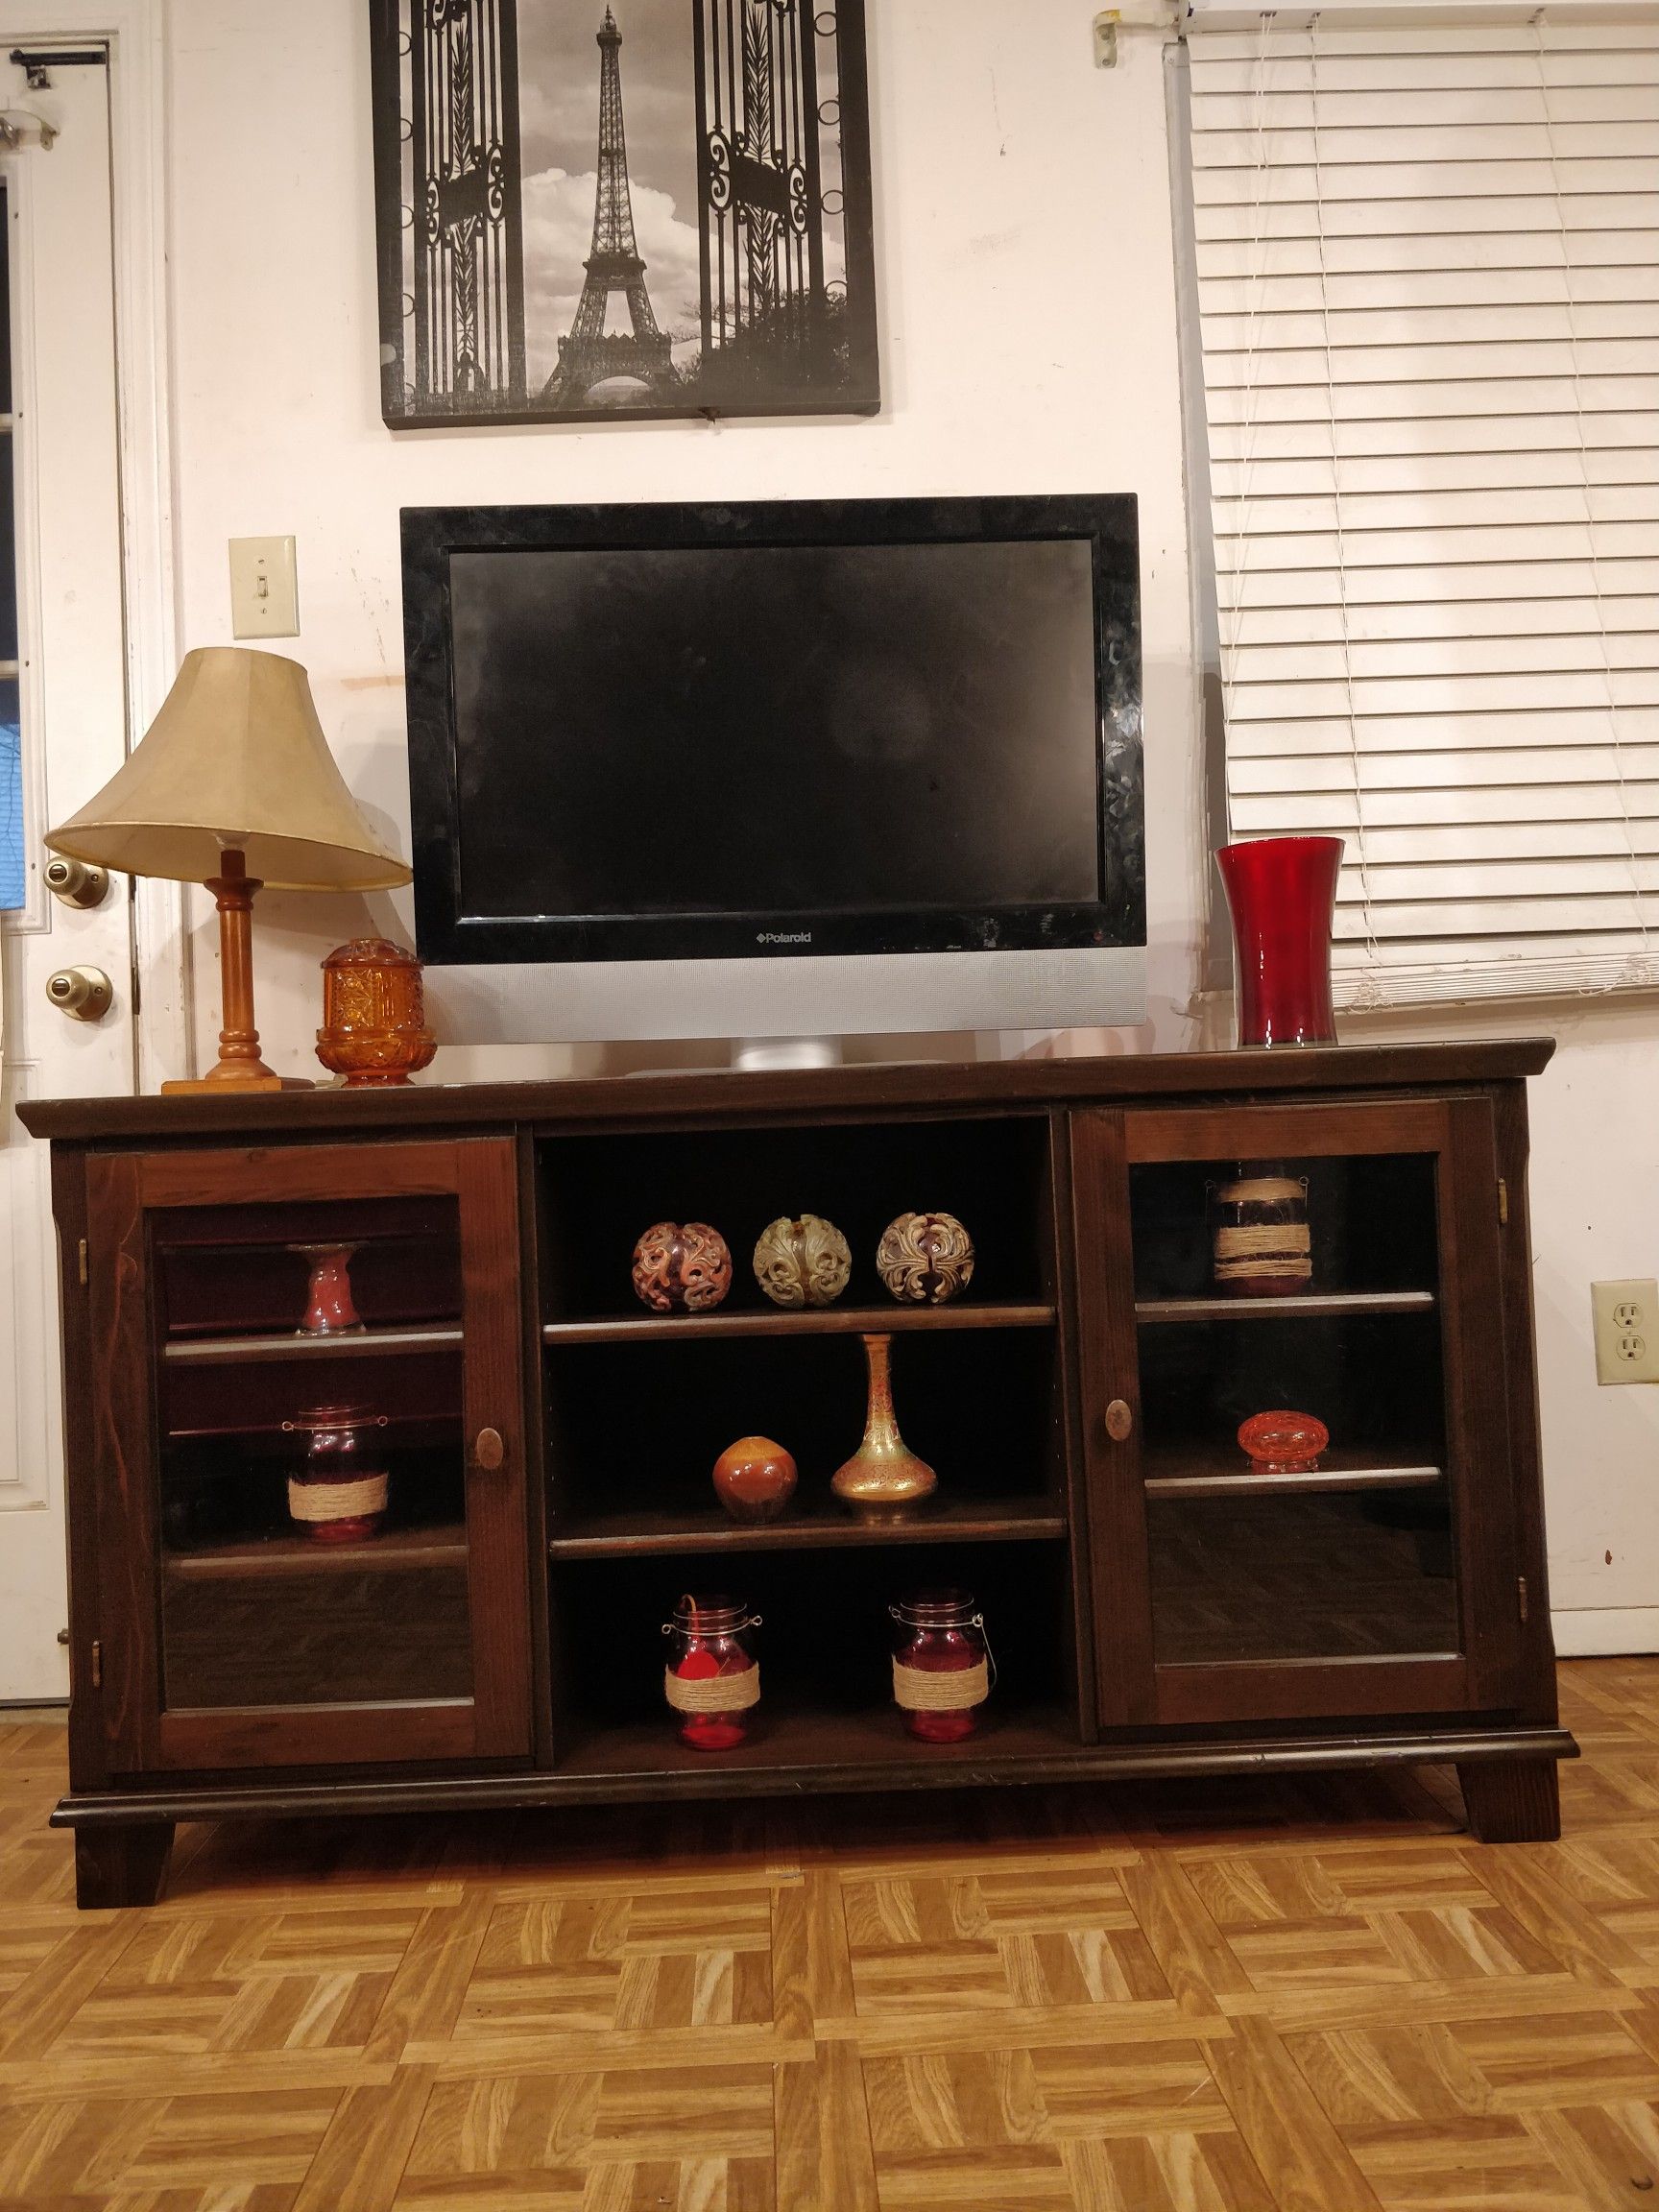 Like new wooden modern big TV stand for big TVs in great condition, you can adjustable all shelves, let me know when yo